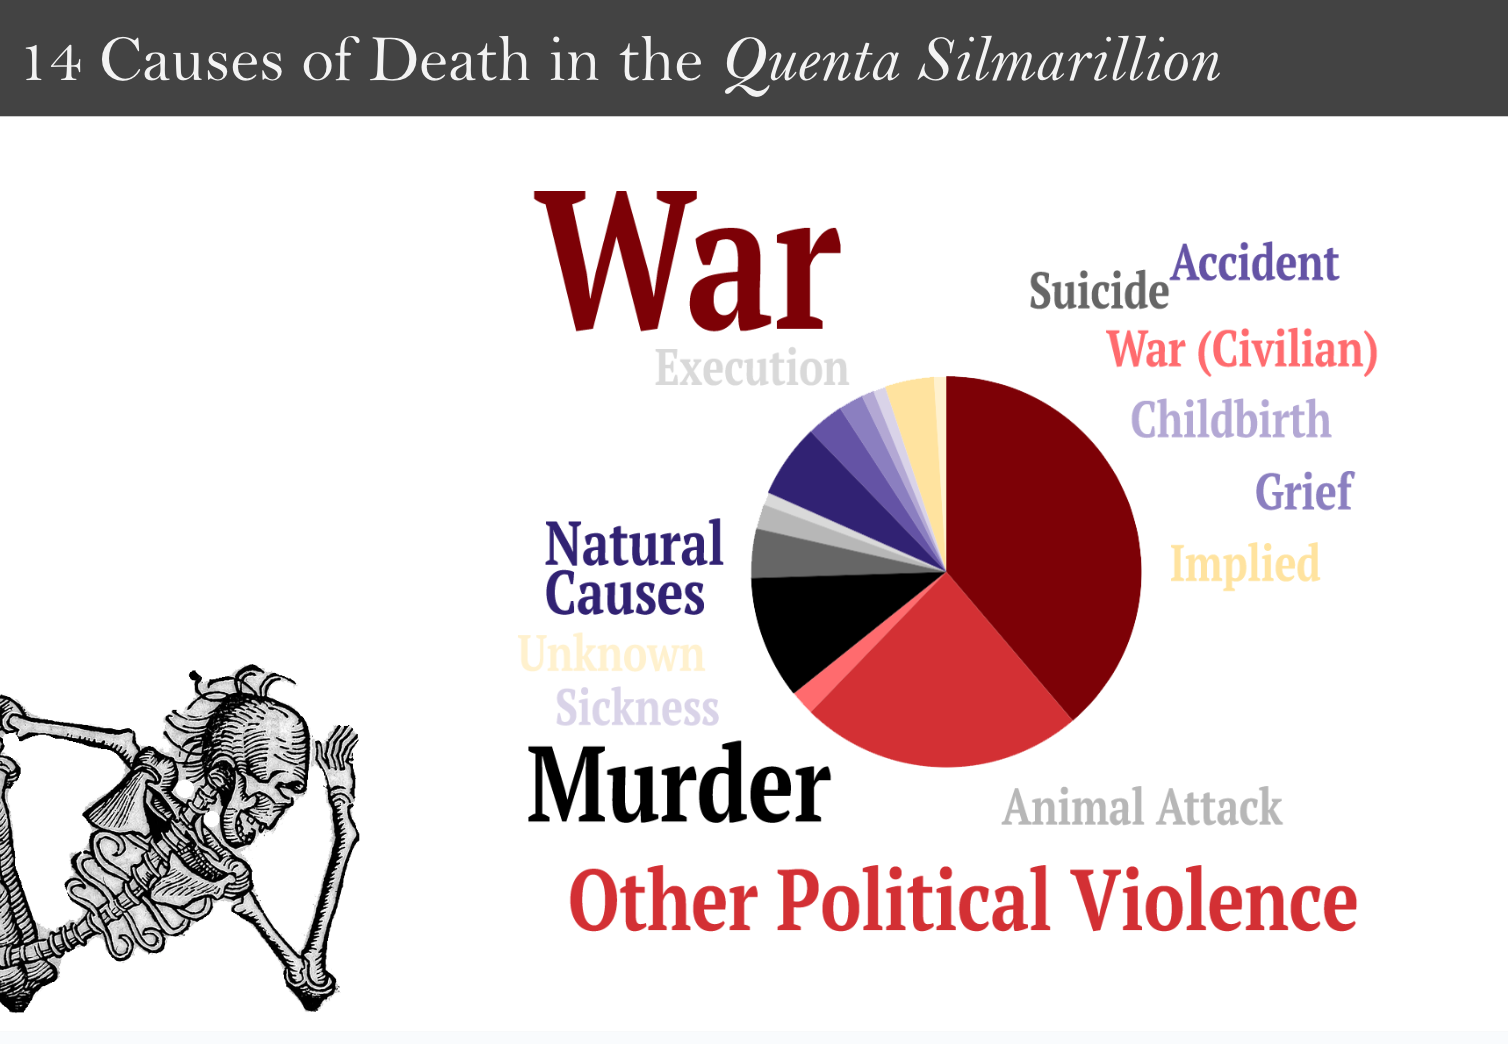 War: 38%. Other Political Violence: 23%. Murder: 10%. Natural Causes: 6%. Implied: 4%. Suicide: 4%. Accident: 3%. Animal Attack: 2%. Grief: 2%. War (Civilian): 2%. Childbirth: 1%. Execution:  1%. Sickness: 1%. Unknown: 1%.